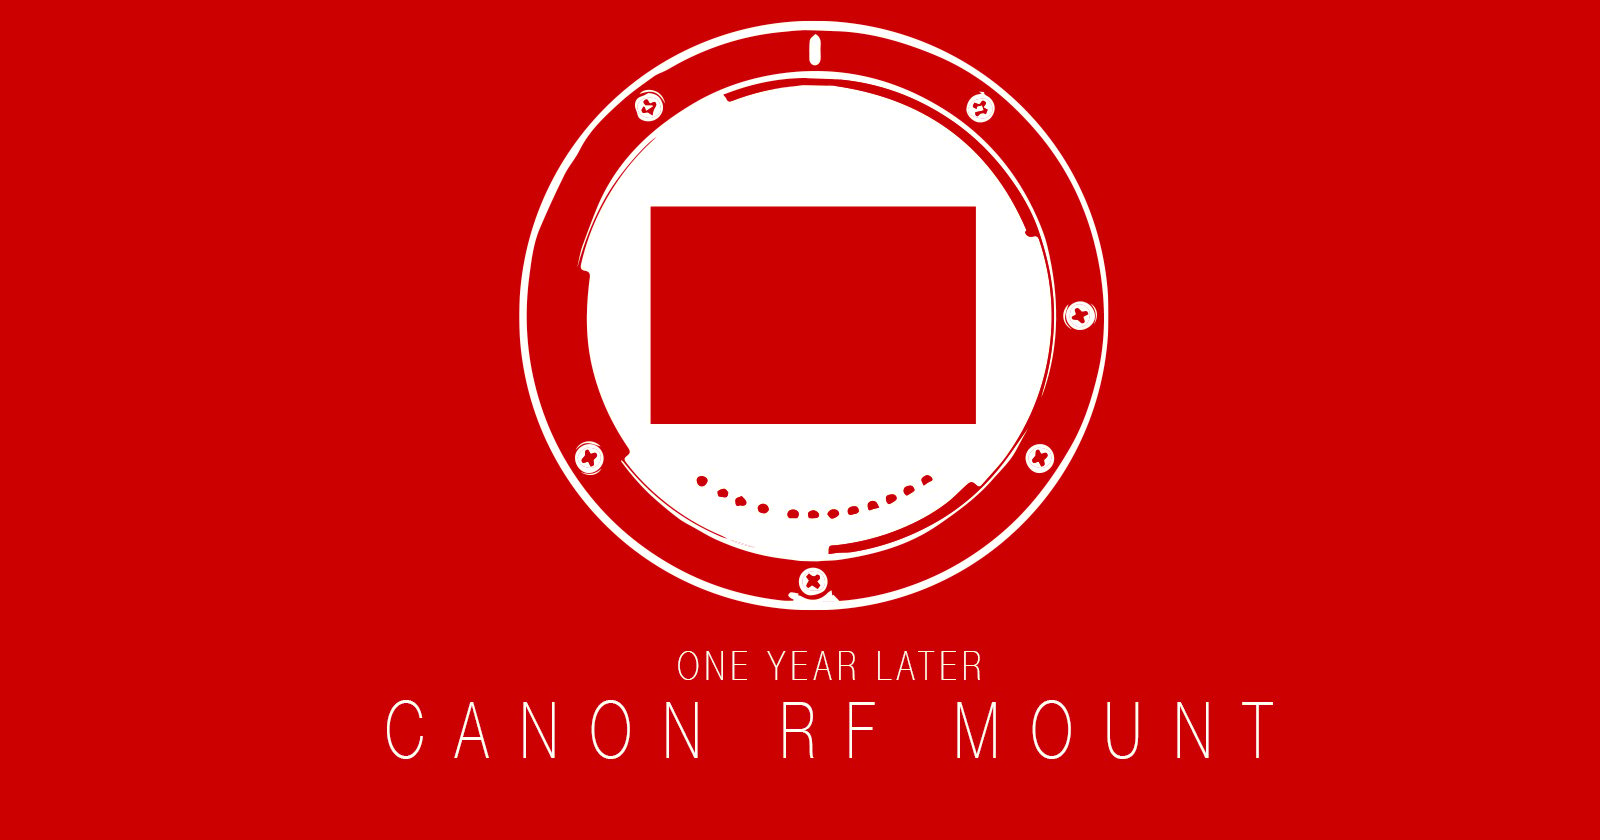  state canon mount one year later 